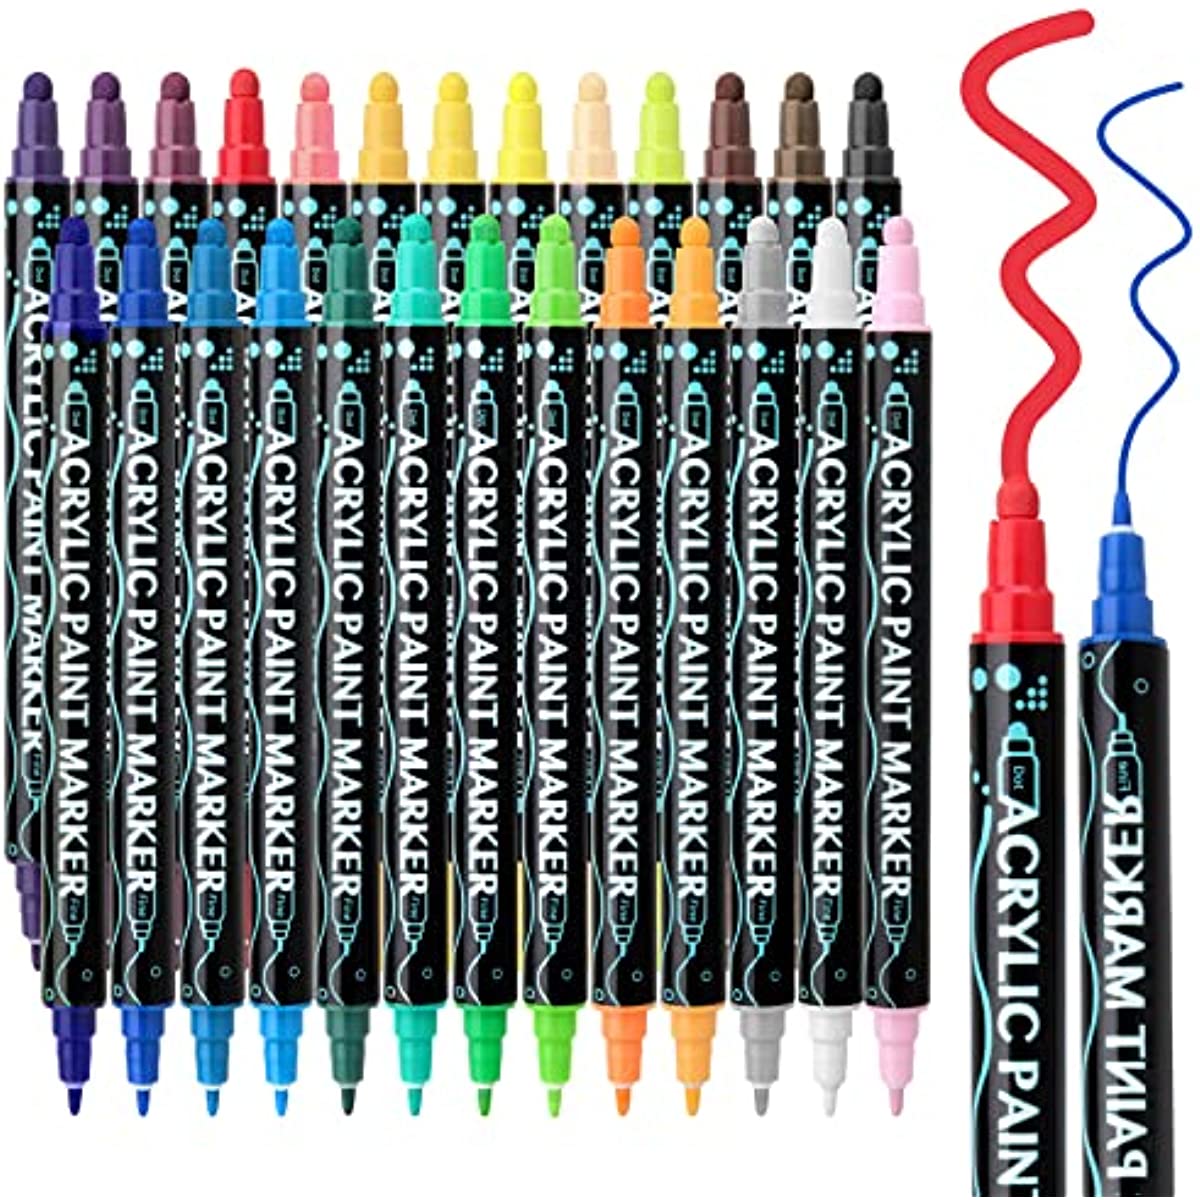 Lzobxe School Supplies Clearance Paint Markers 20pc Multifunctional DIY Graffiti Pen, Easy to Write and Easy to Erase Marker Pen2ml, Size: One Size